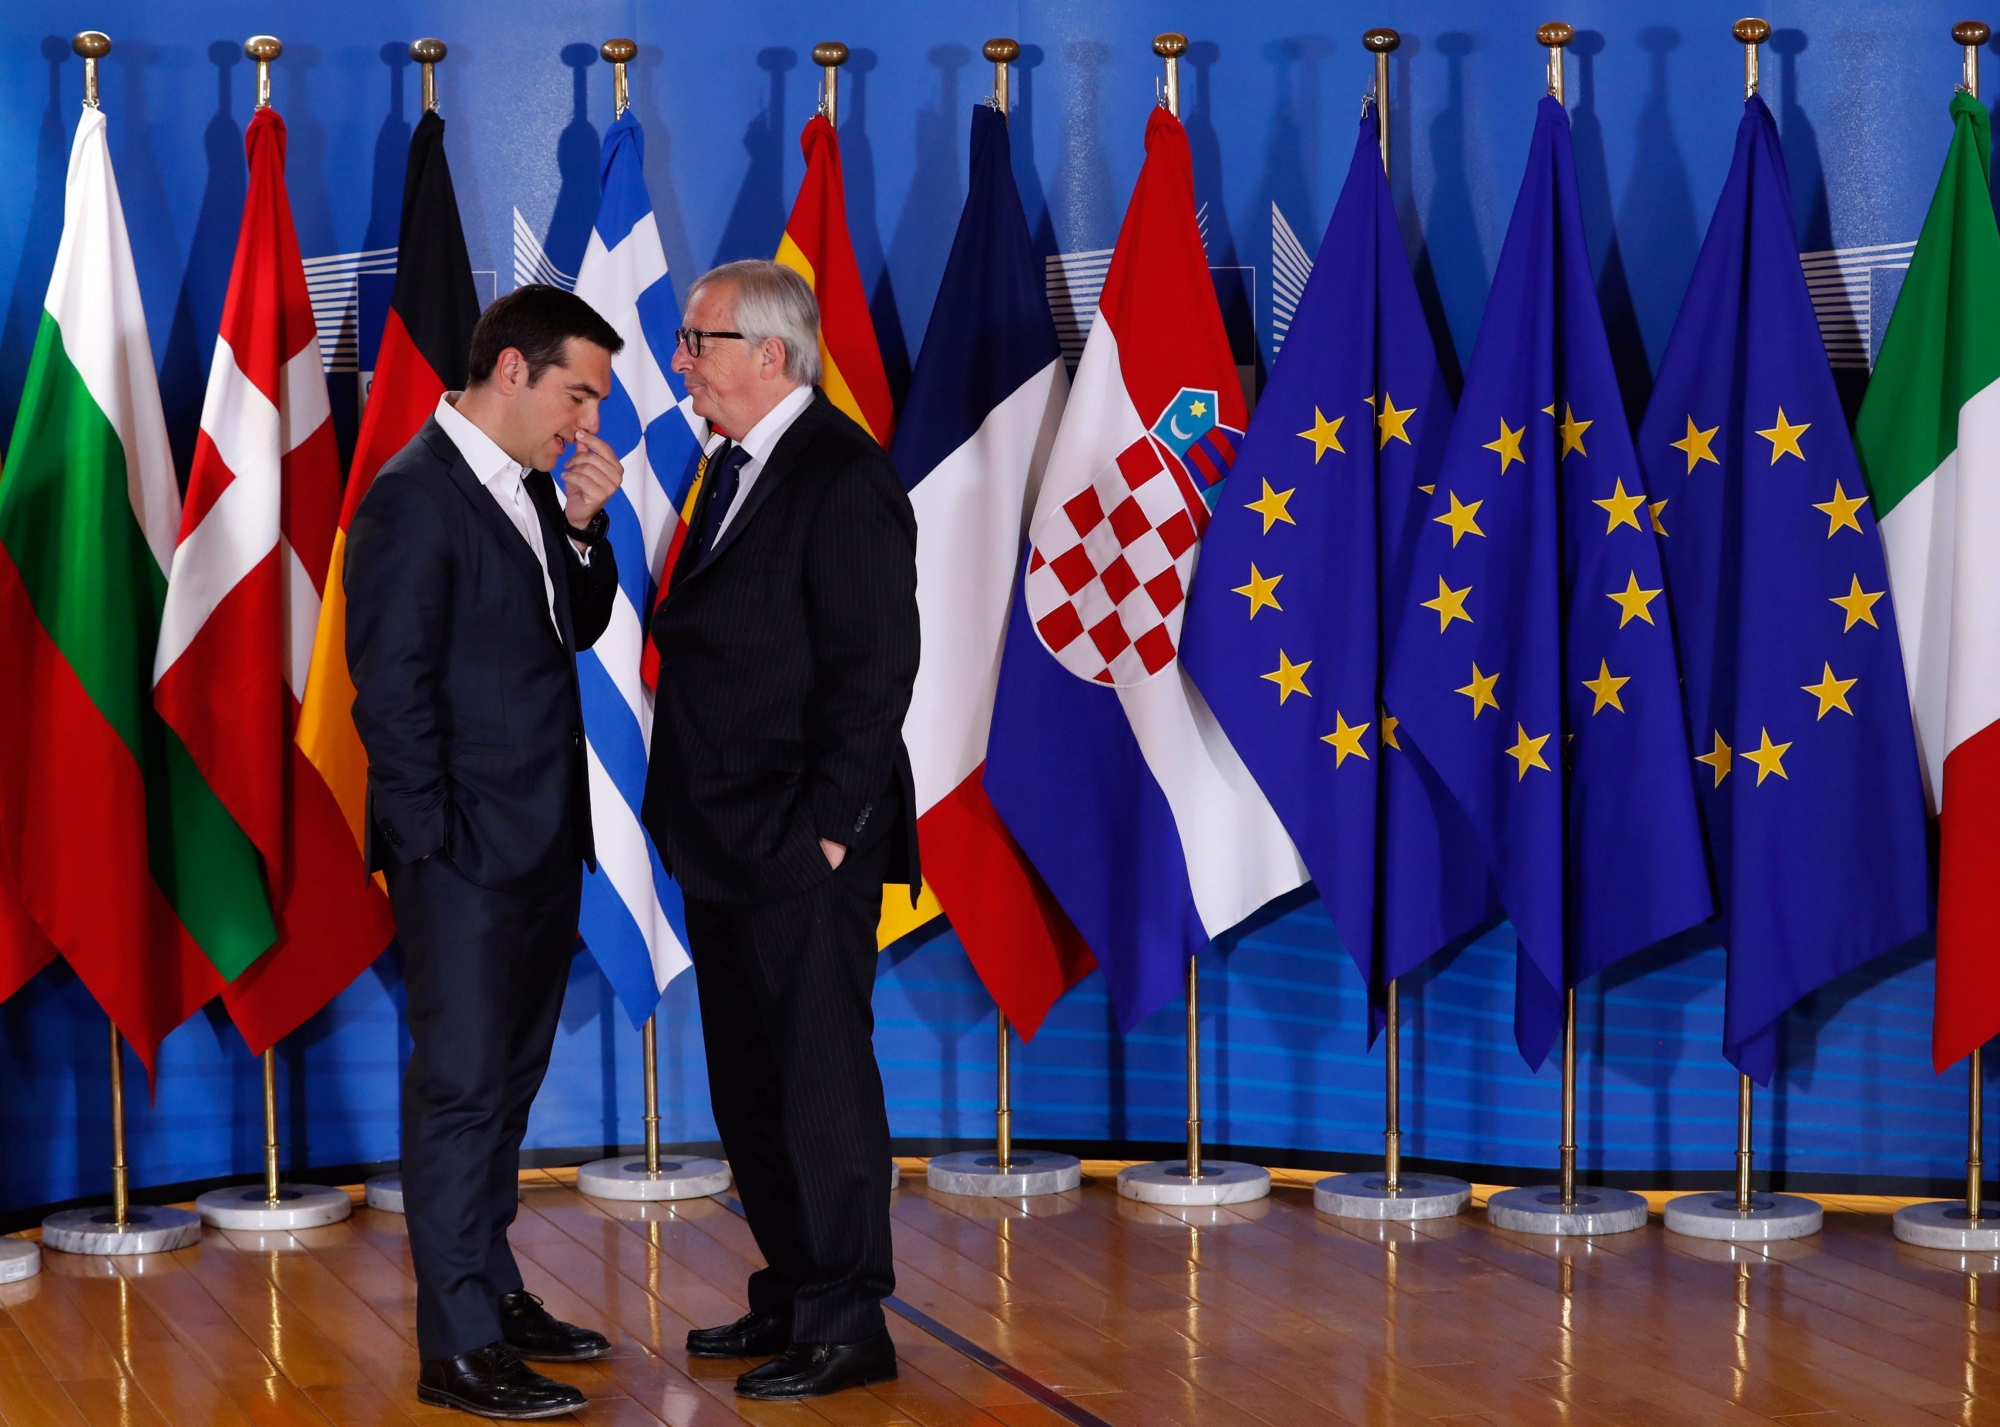 epa06836666 Greek Prime Minister Alexis Tsipras (L) is welcomed by European Commission President Jean-Claude Juncker (R) for an informal meeting on migration and asylum issues in Brussels, Belgium, 24 June 2018. European Commission President Jean-Claude Juncker hosts the gathering ahead of a full summit of all 28 European Union leaders to overhaul the EU asylum system on June 28.  EPA/YVES HERMAN / POOL BELGIUM EU MIGRATION ASYLUM